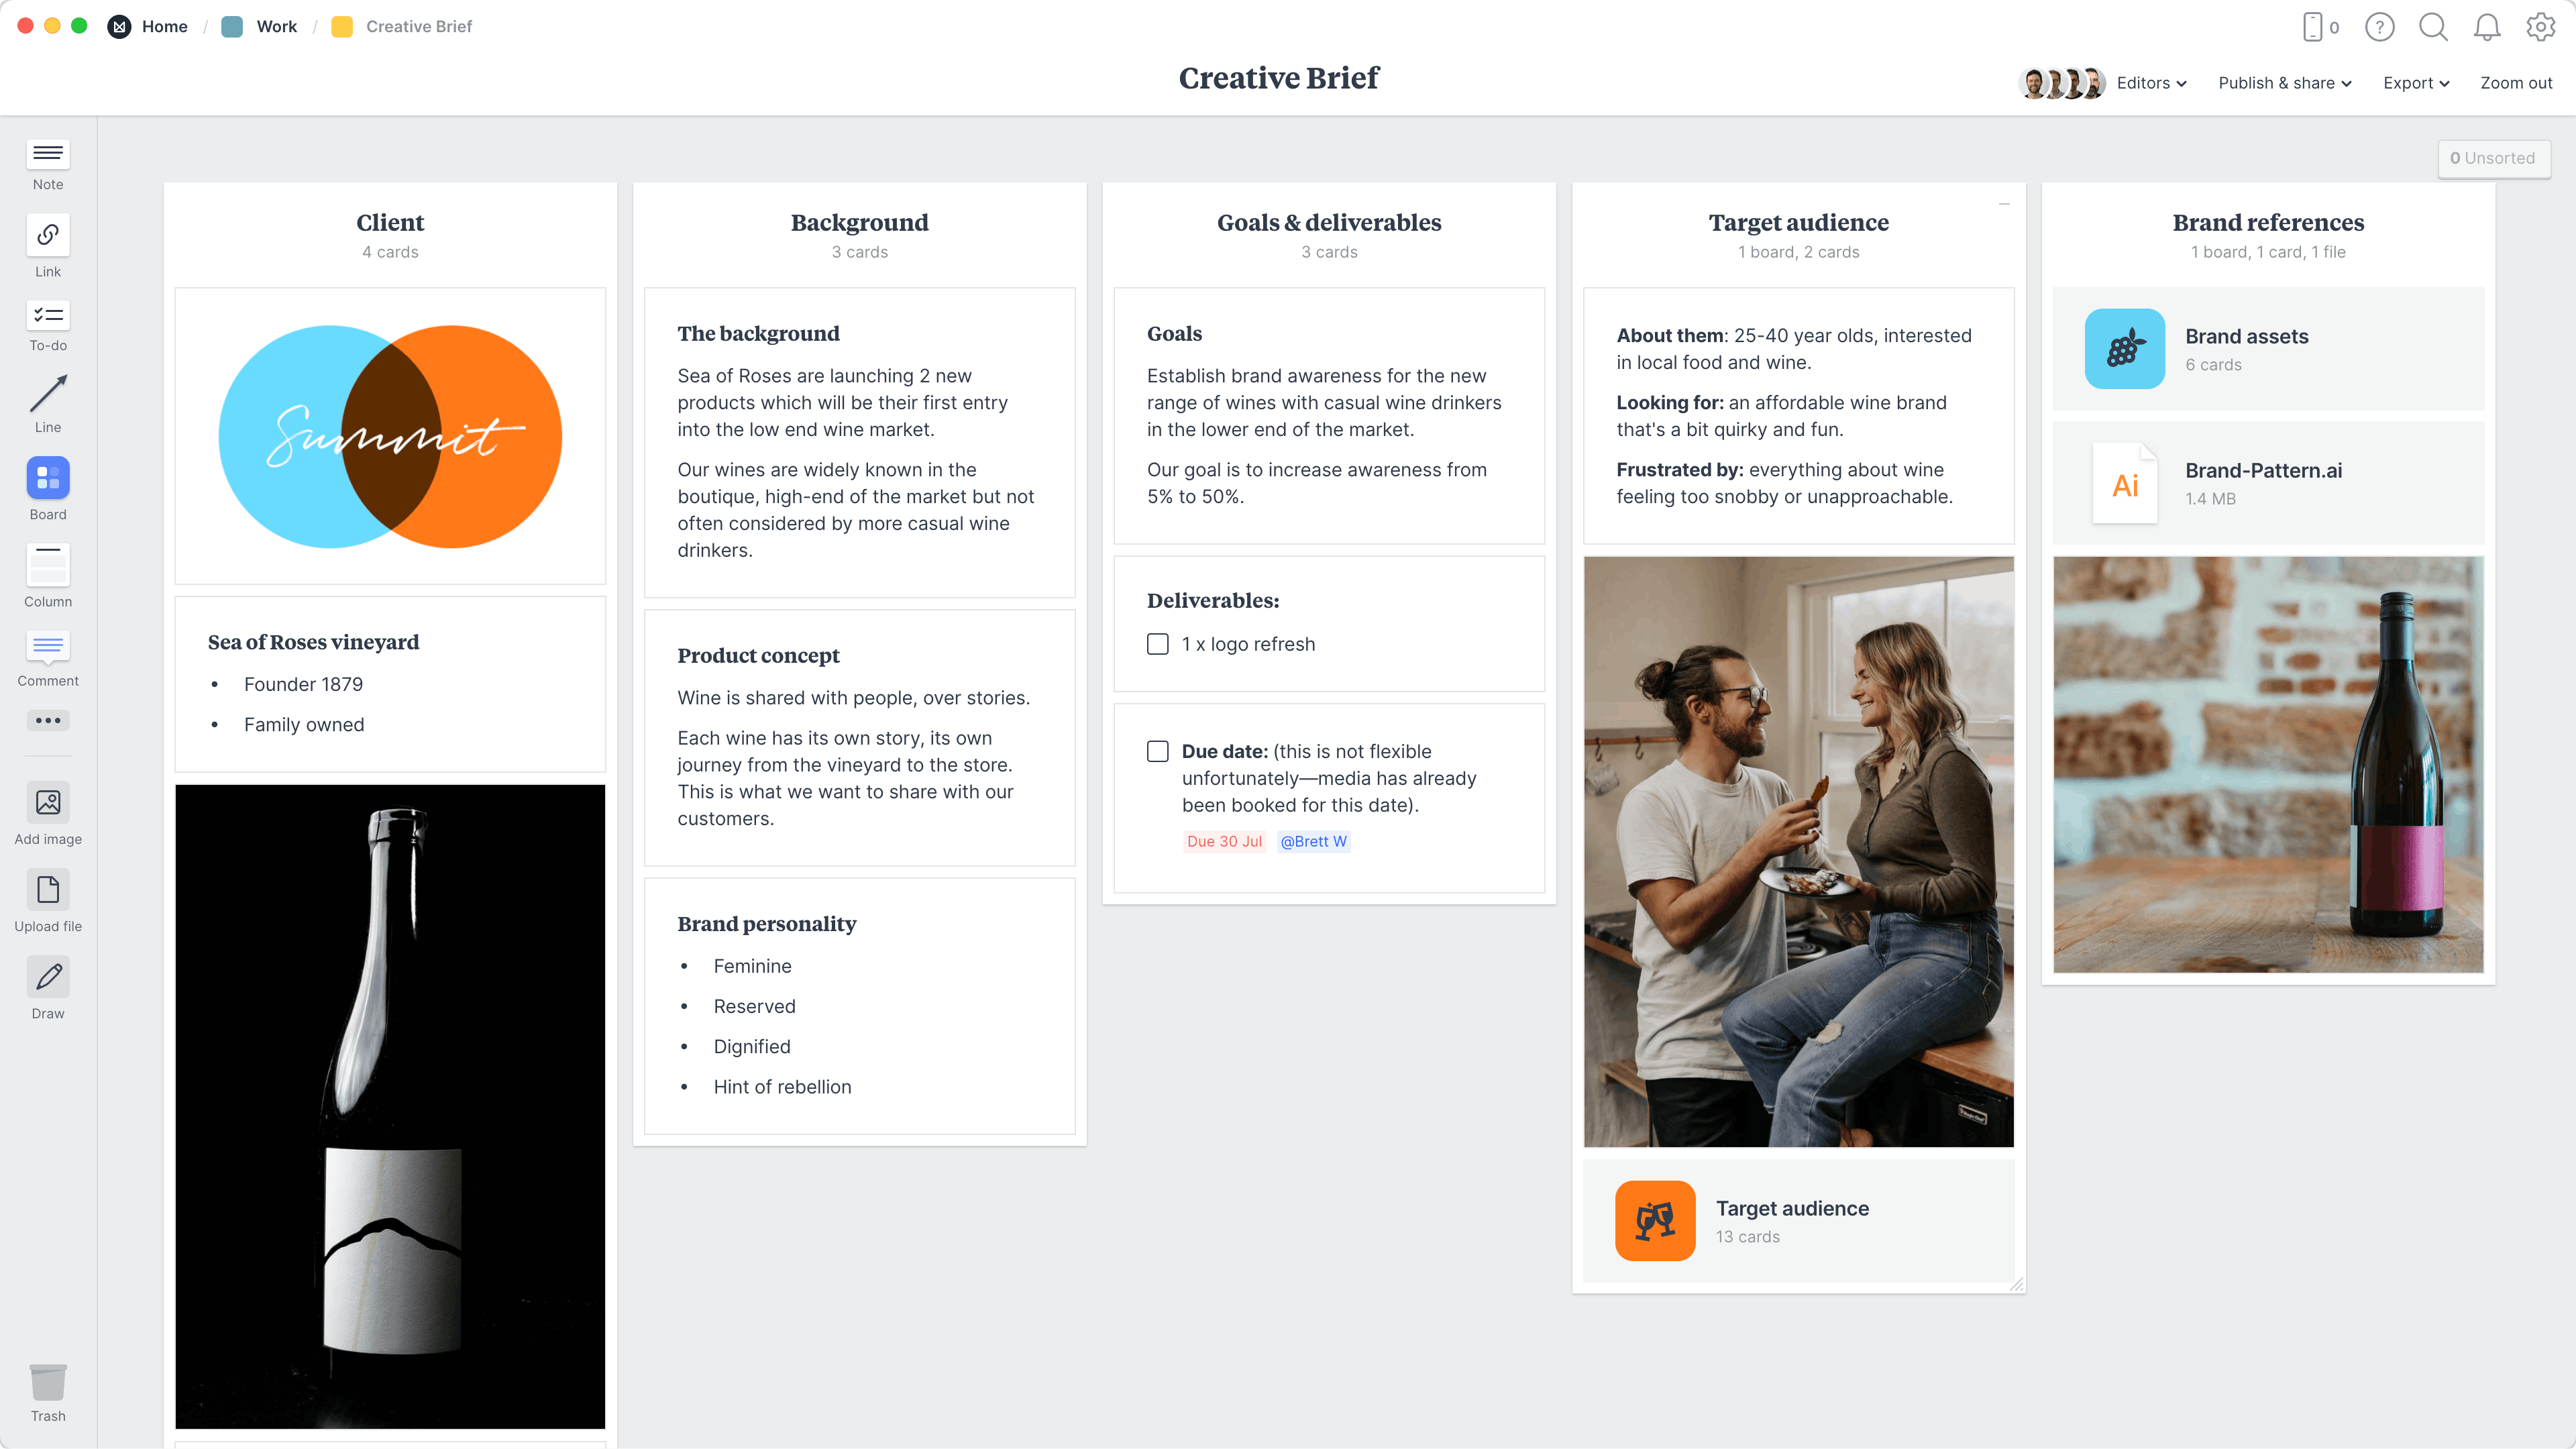 How to Write a Design Brief (with Examples)